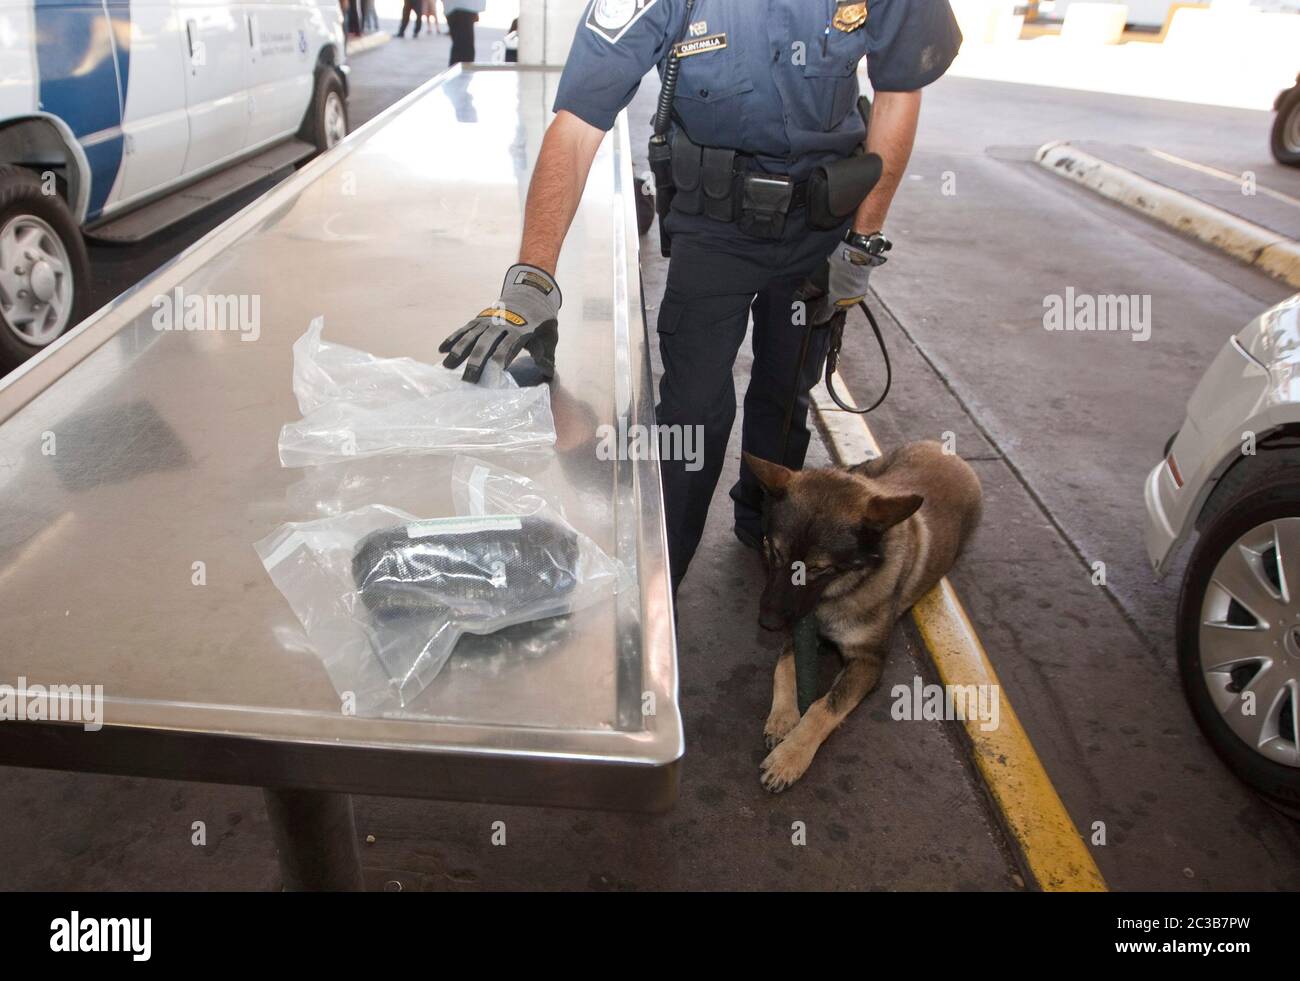 Laredo, Texas USA, 2012: At a U.S Customs and Border Protection station, an agent shows a bag full of drugs found by service dog during a training exercise. © MKC /  Daemmrich Photos Stock Photo